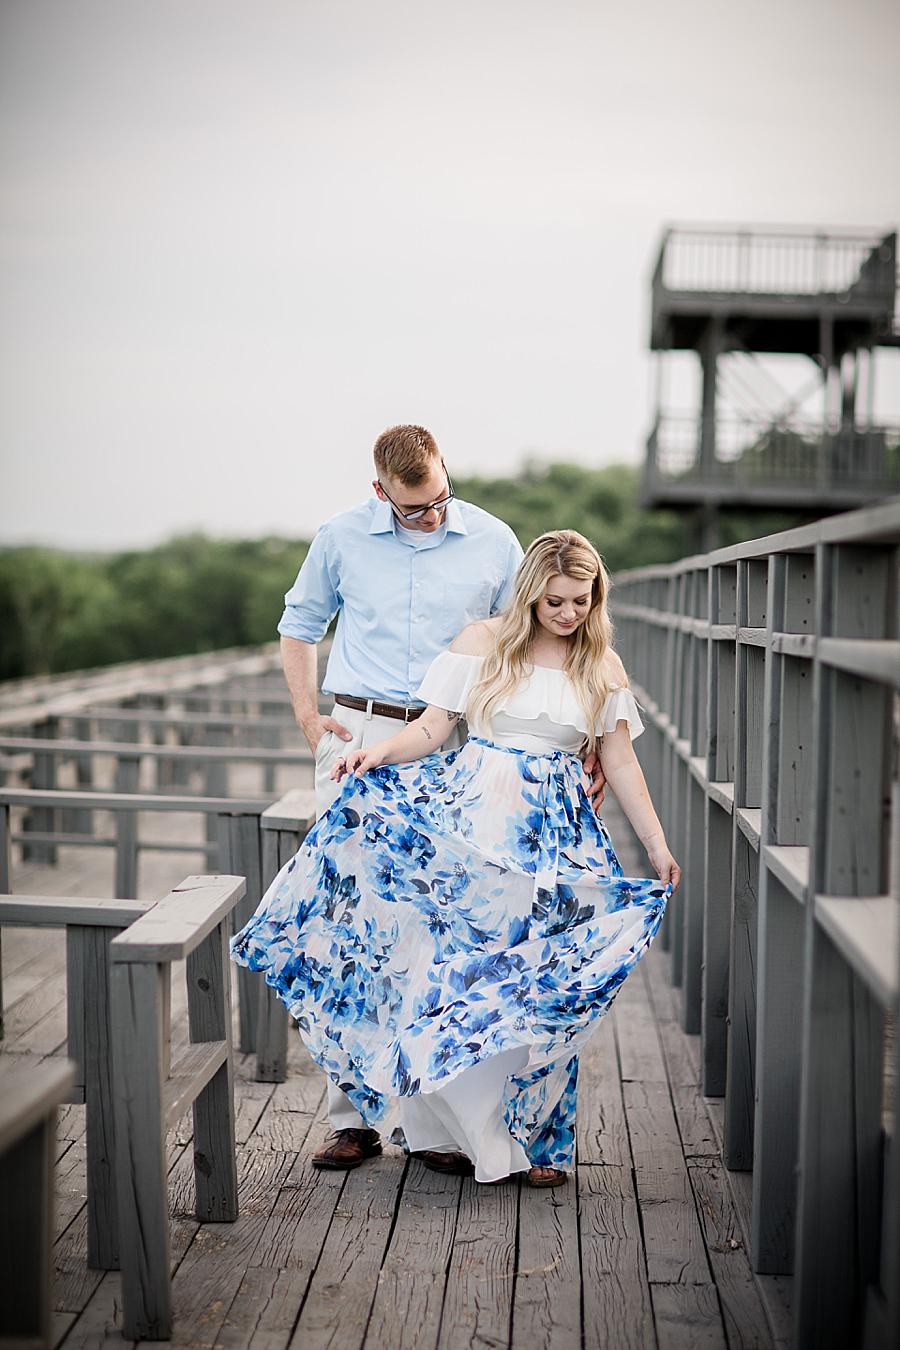 Twirling the skirt at this Percy Warner Engagement Session by Knoxville Wedding Photographer, Amanda May Photos.